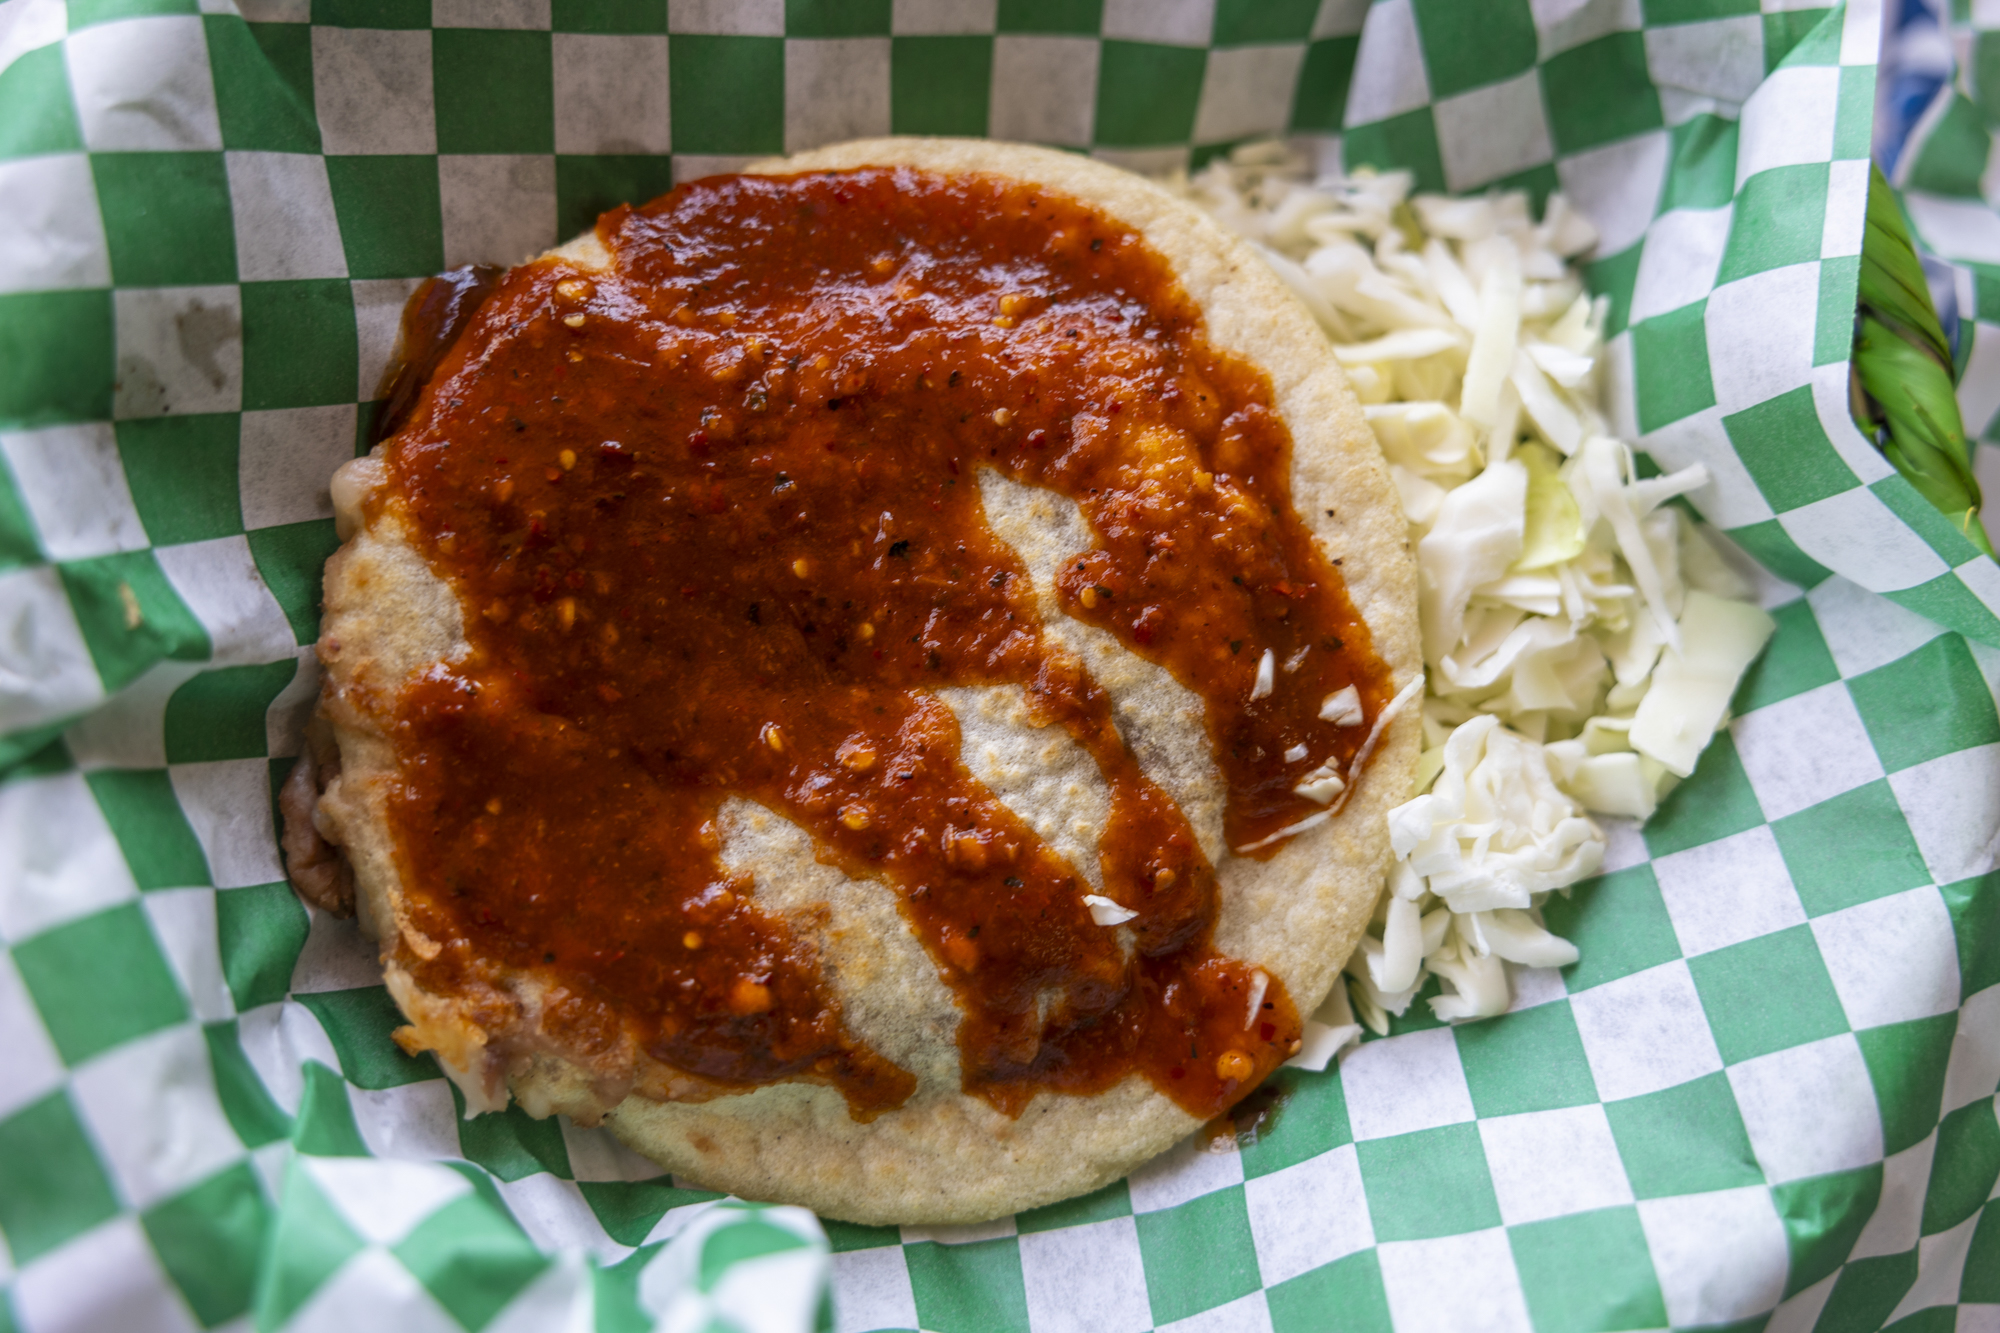 A picadillo gordita with salsa and shredded cabbage.